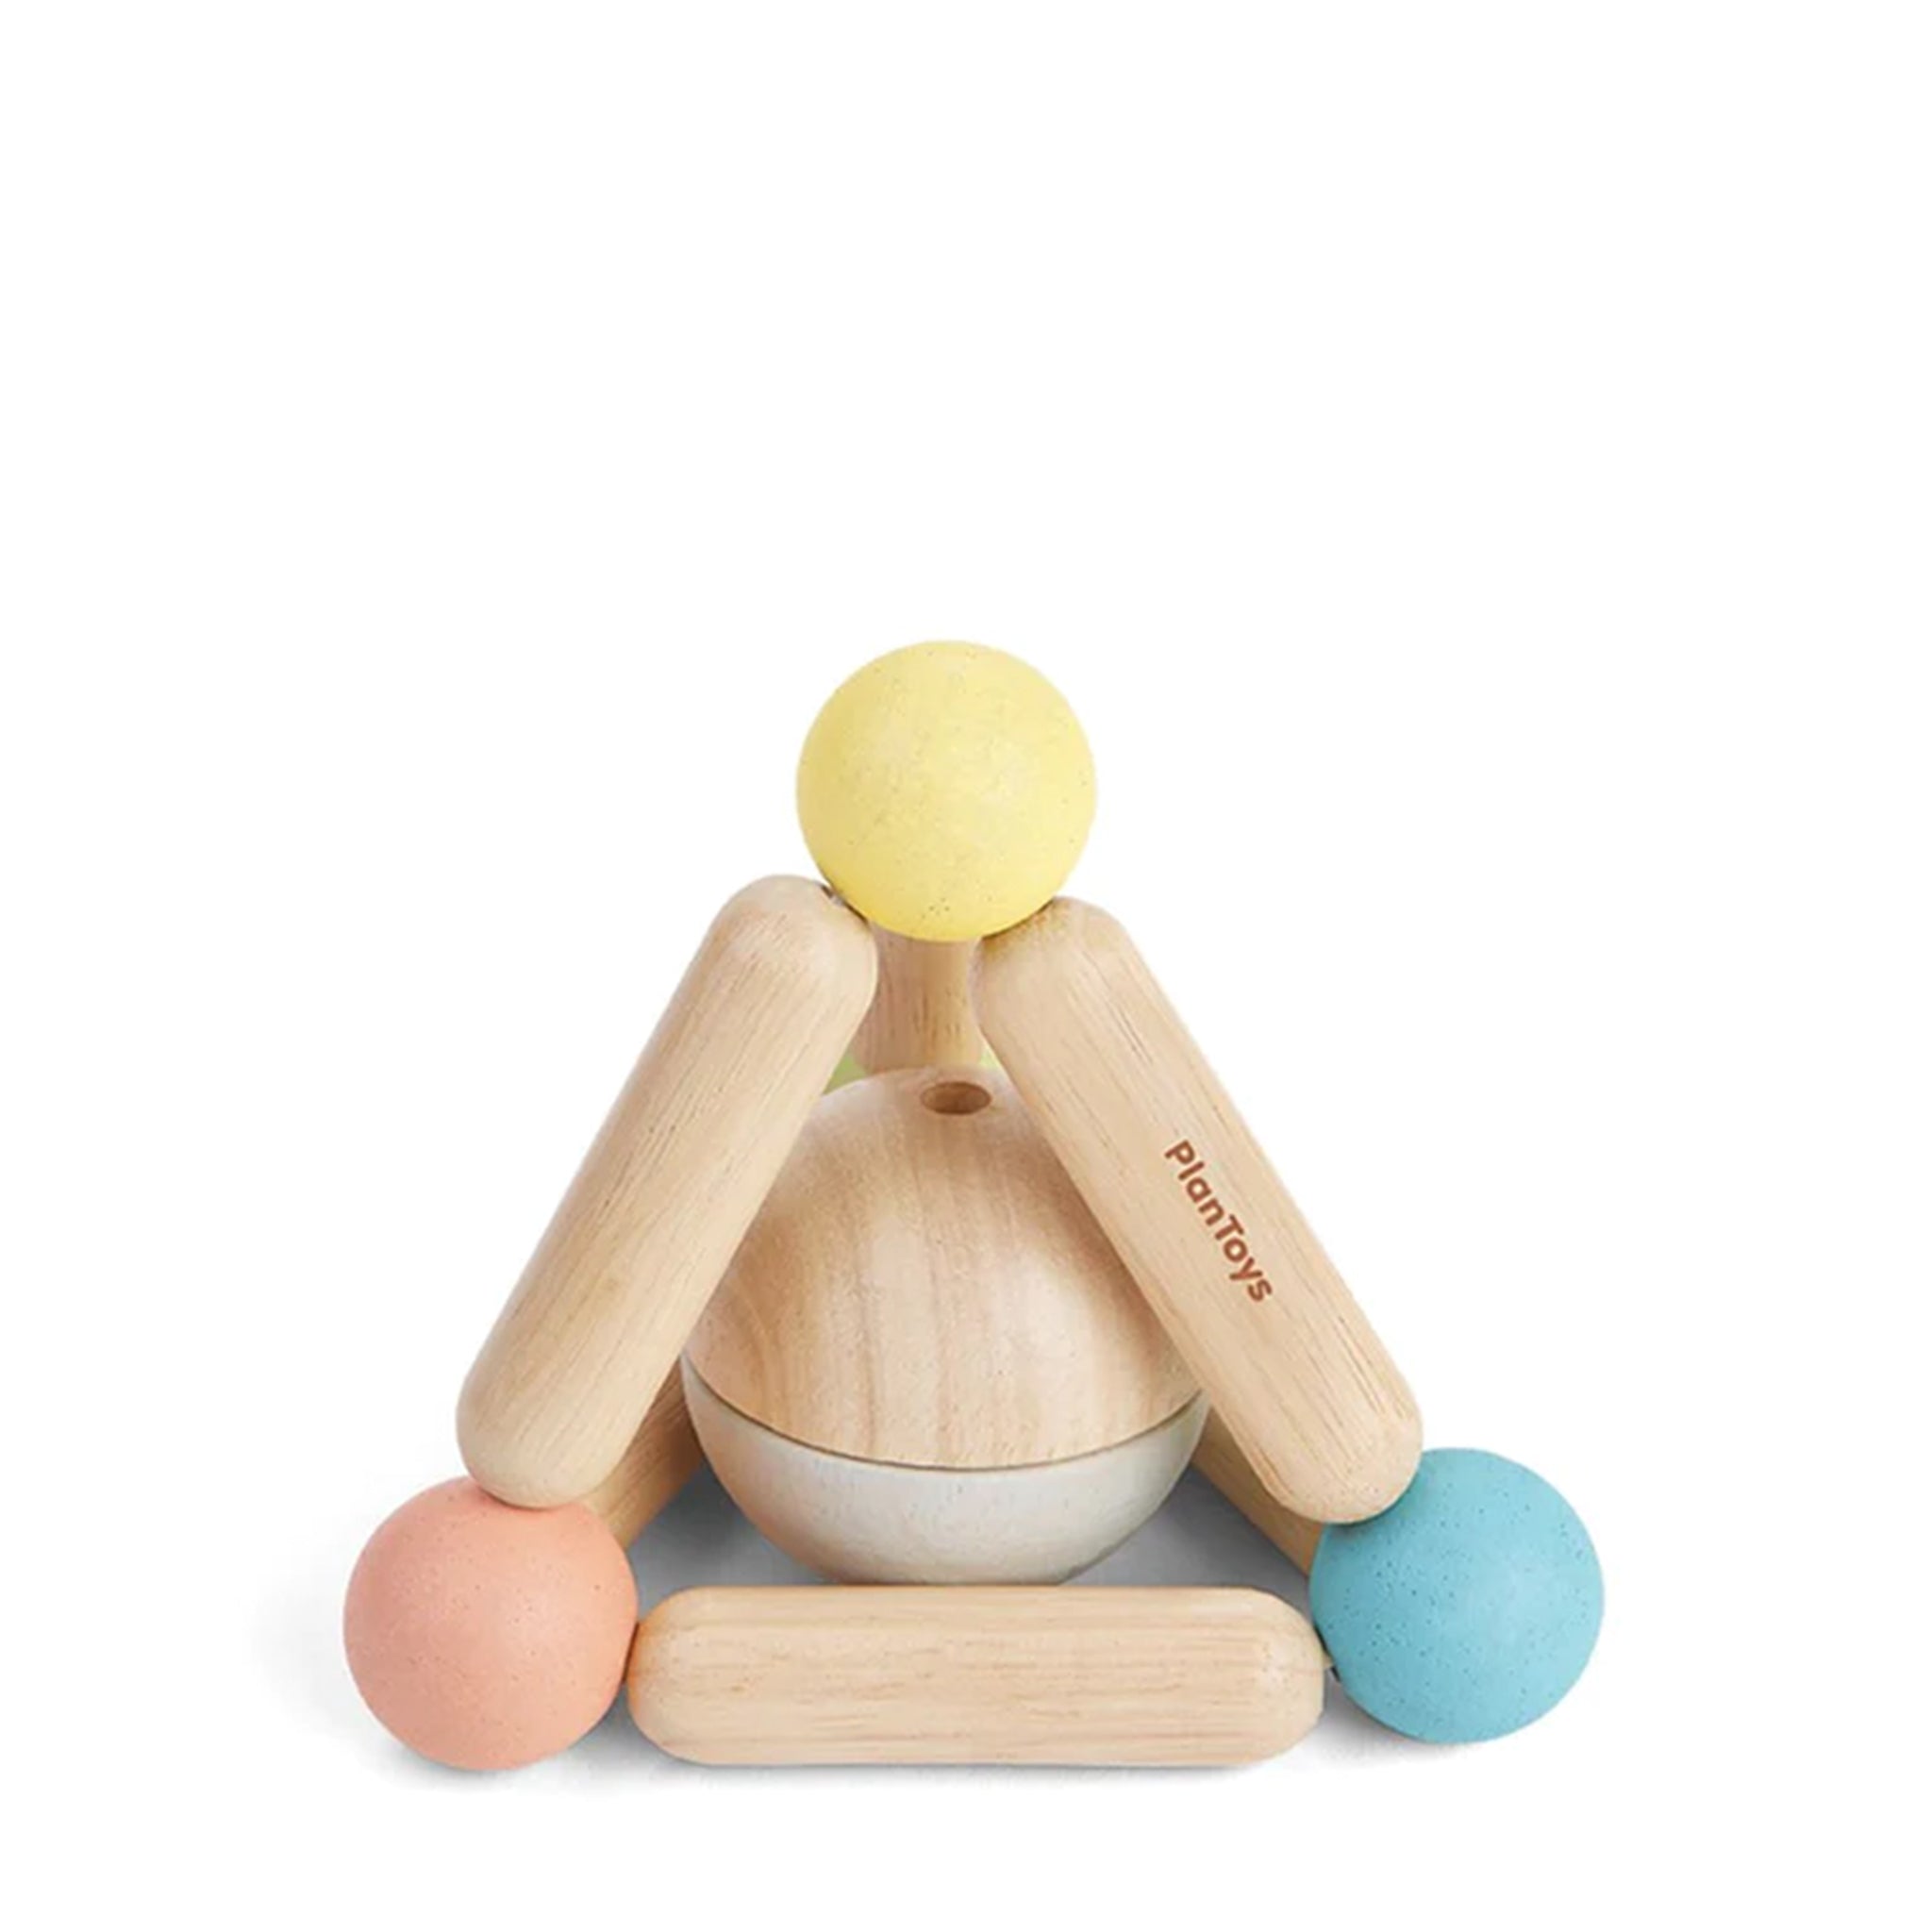 TRIANGLE CLUTCHING TOY PASTEL